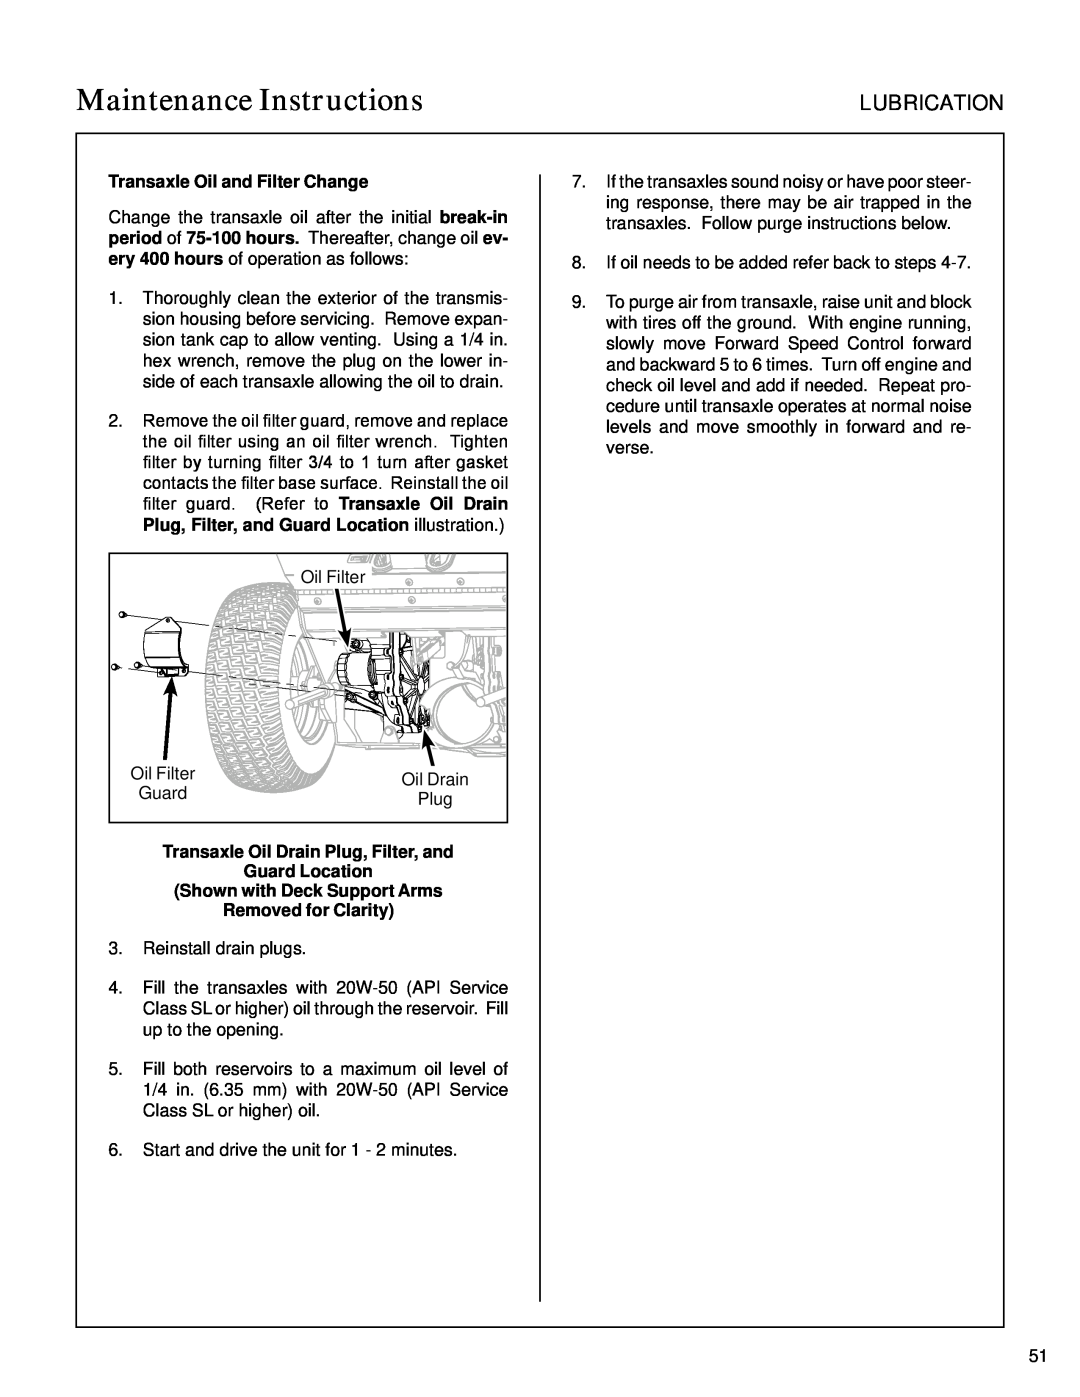 Walker S14 Transaxle Oil and Filter Change, Transaxle Oil Drain Plug, Filter, and, Maintenance Instructions, Lubrication 